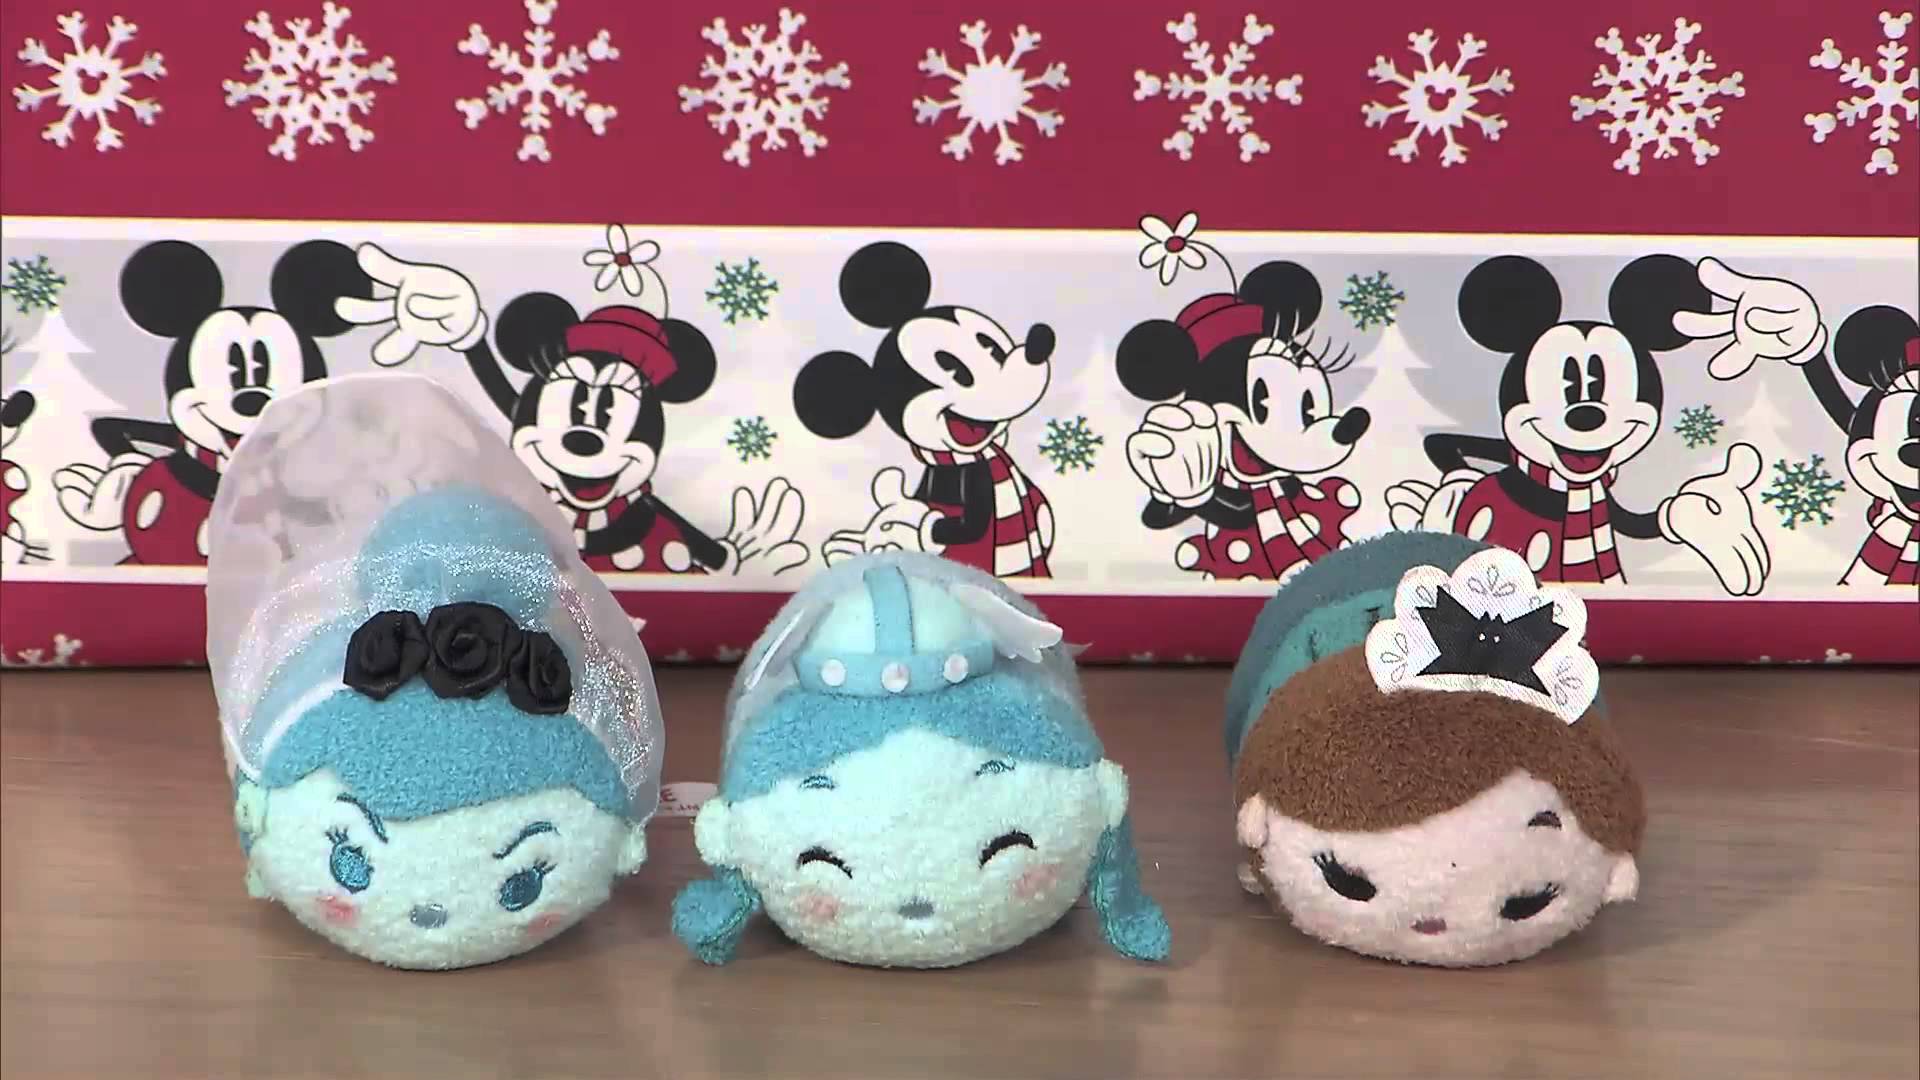 A First Look at Merchandise Heading to Disney Parks in 2016